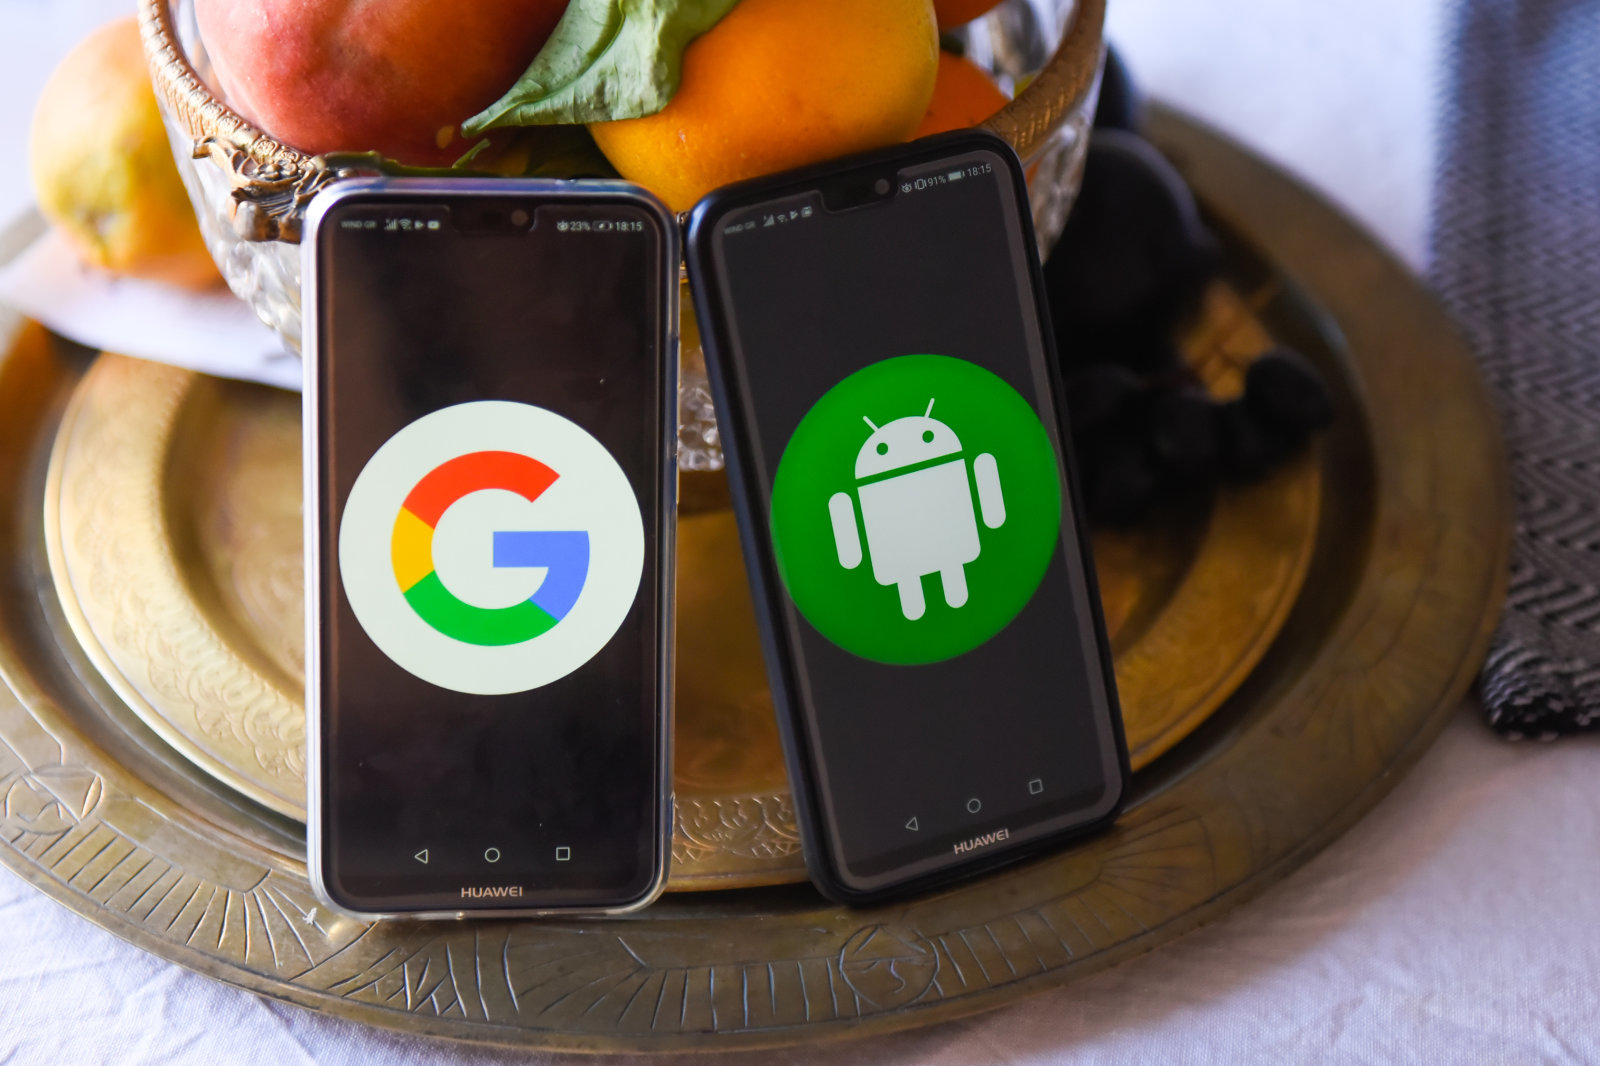 ATHENS, GREECE - 2018/08/10: A Google and Android logos is seen on mobile phones. (Photo by Omar Marques/SOPA Images/LightRocket via Getty Images)